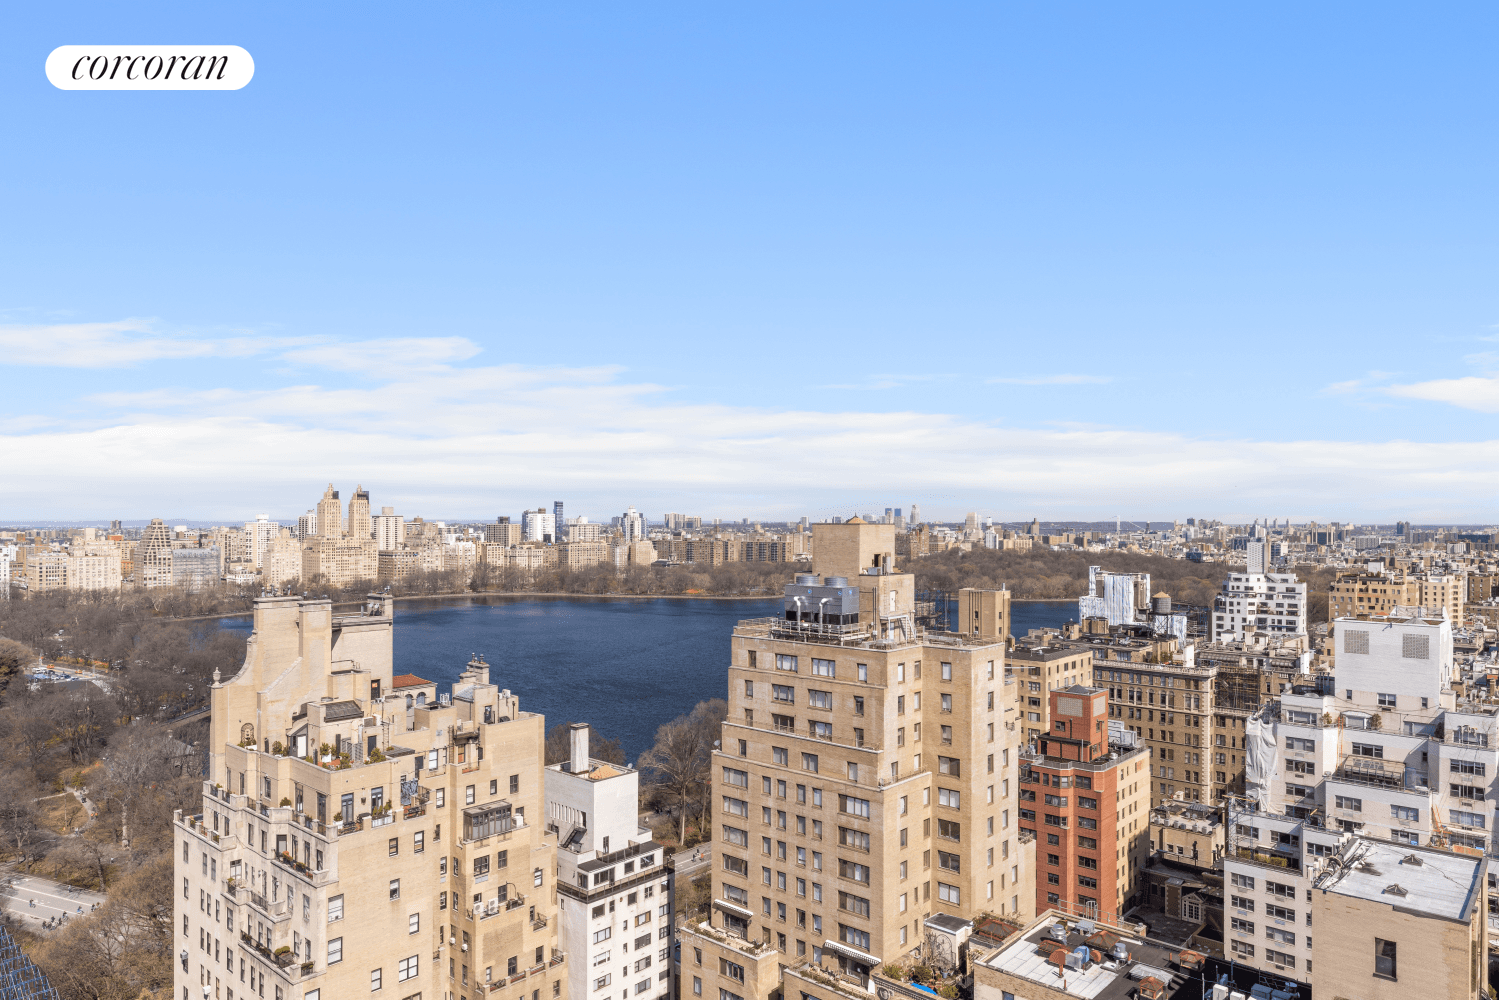 Rare Duplex Residence 30 East 85th Street Sweeping Central Park and Reservoir ViewsFive Bedrooms Five Bathrooms Powder Room Over 3, 000 sqft.